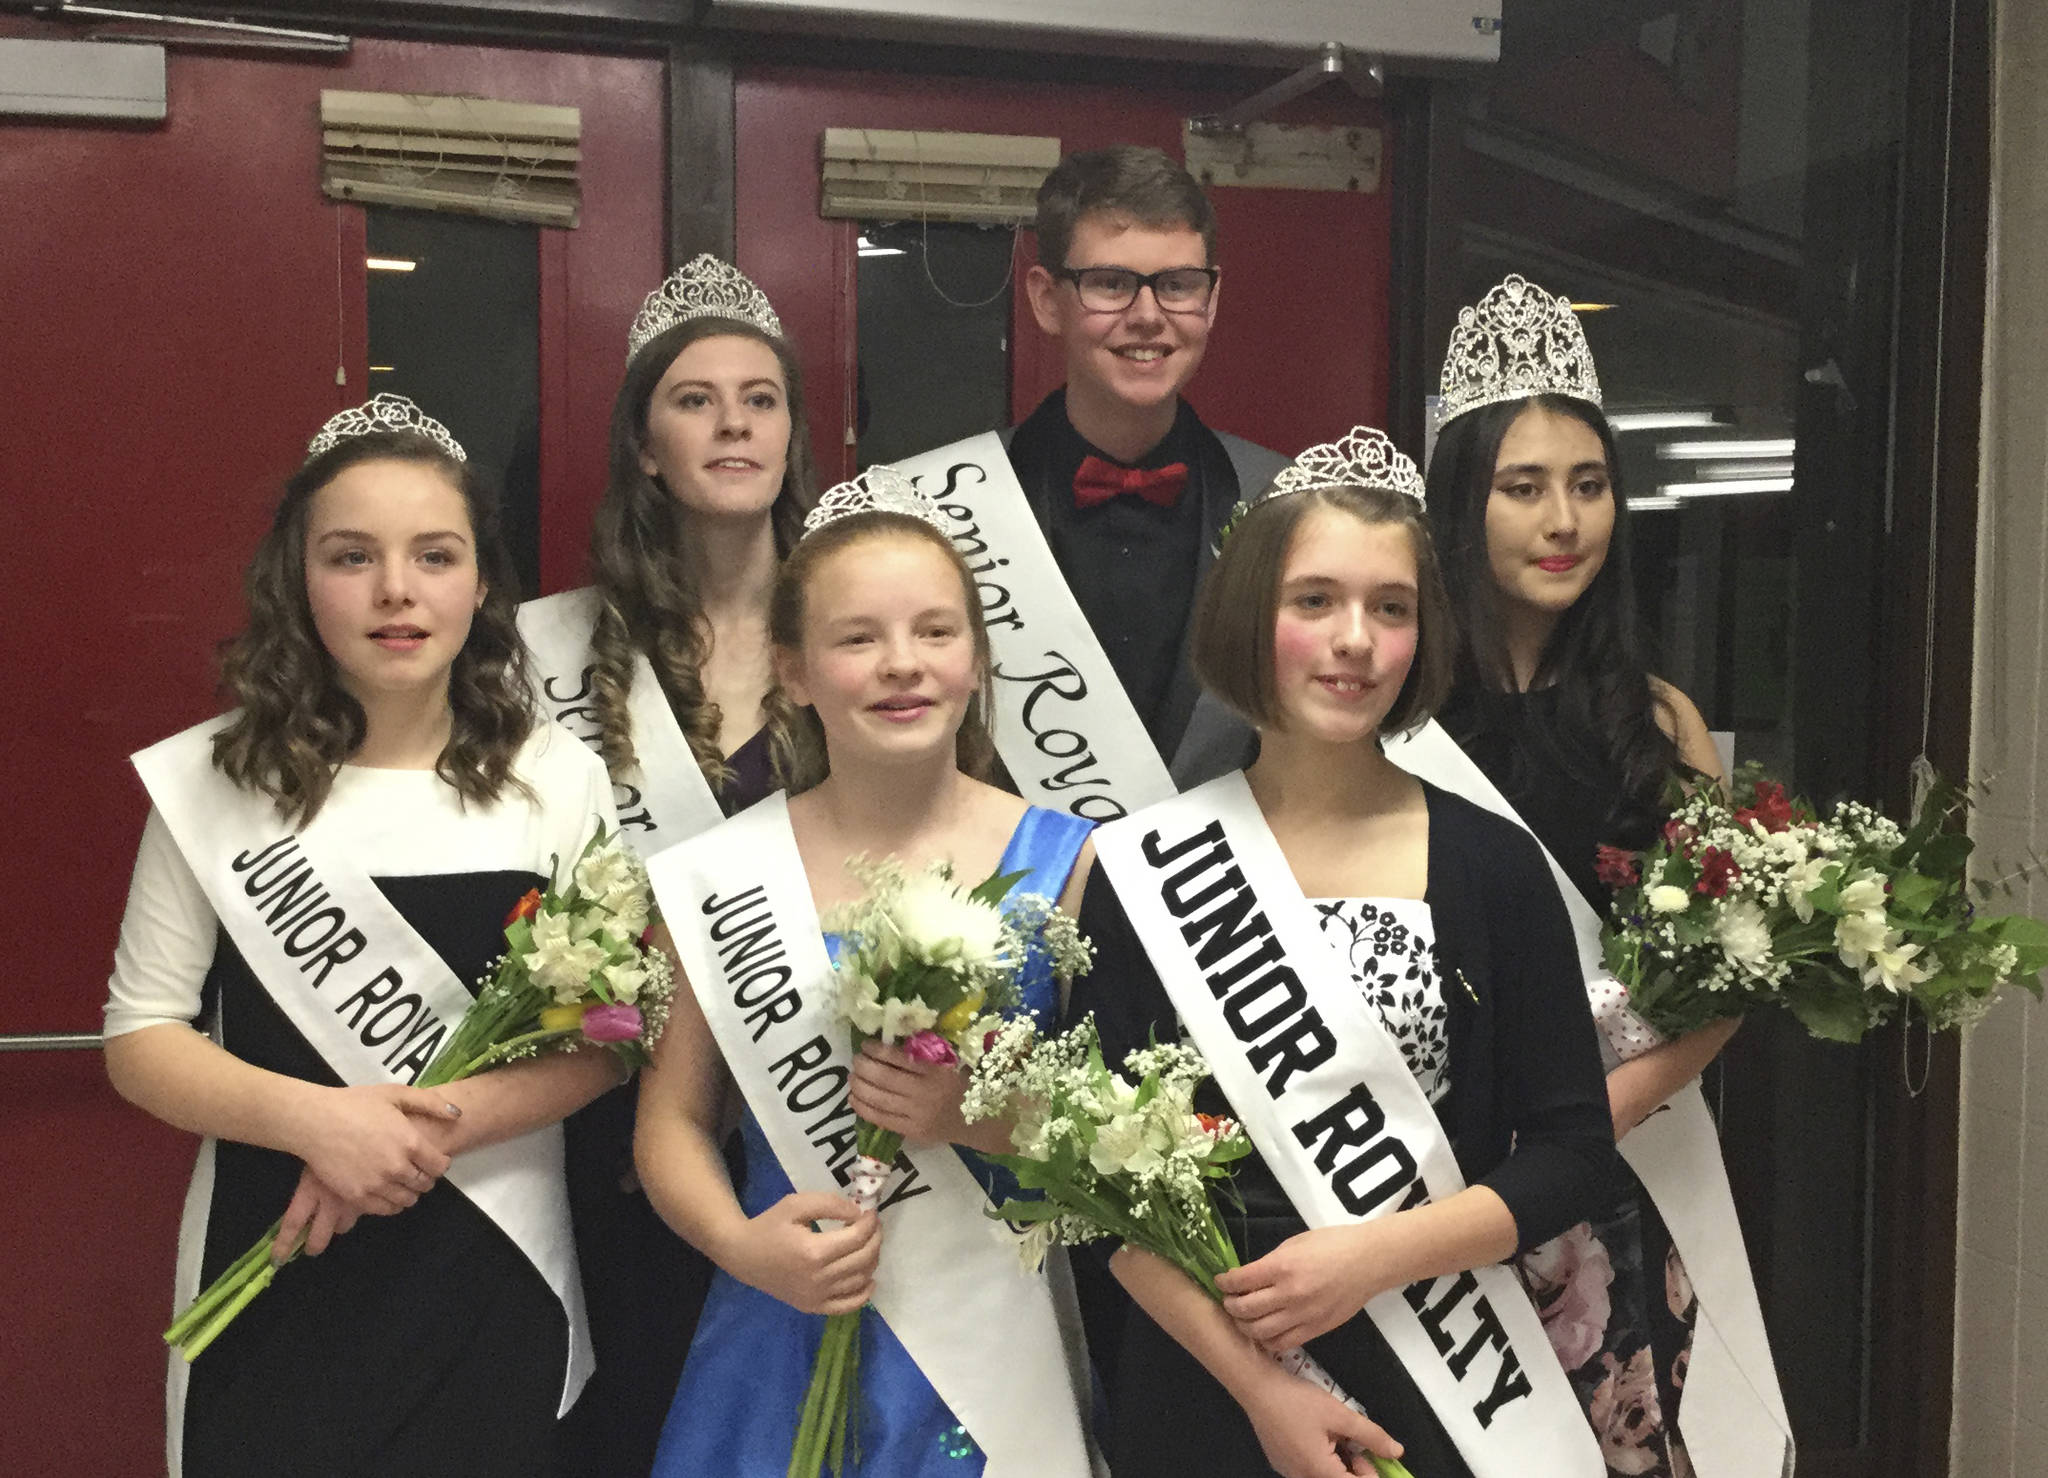 Douglas Buell/Staff photo                                The 2018 Marysville Strawberry Festival senior royalty court in back row: Kaitlyn Norris, Nathan Weller and Katelynn Melohusky. Junior royalty from left are Abigail Lewis, Emmah Butler and Ziri Morales.